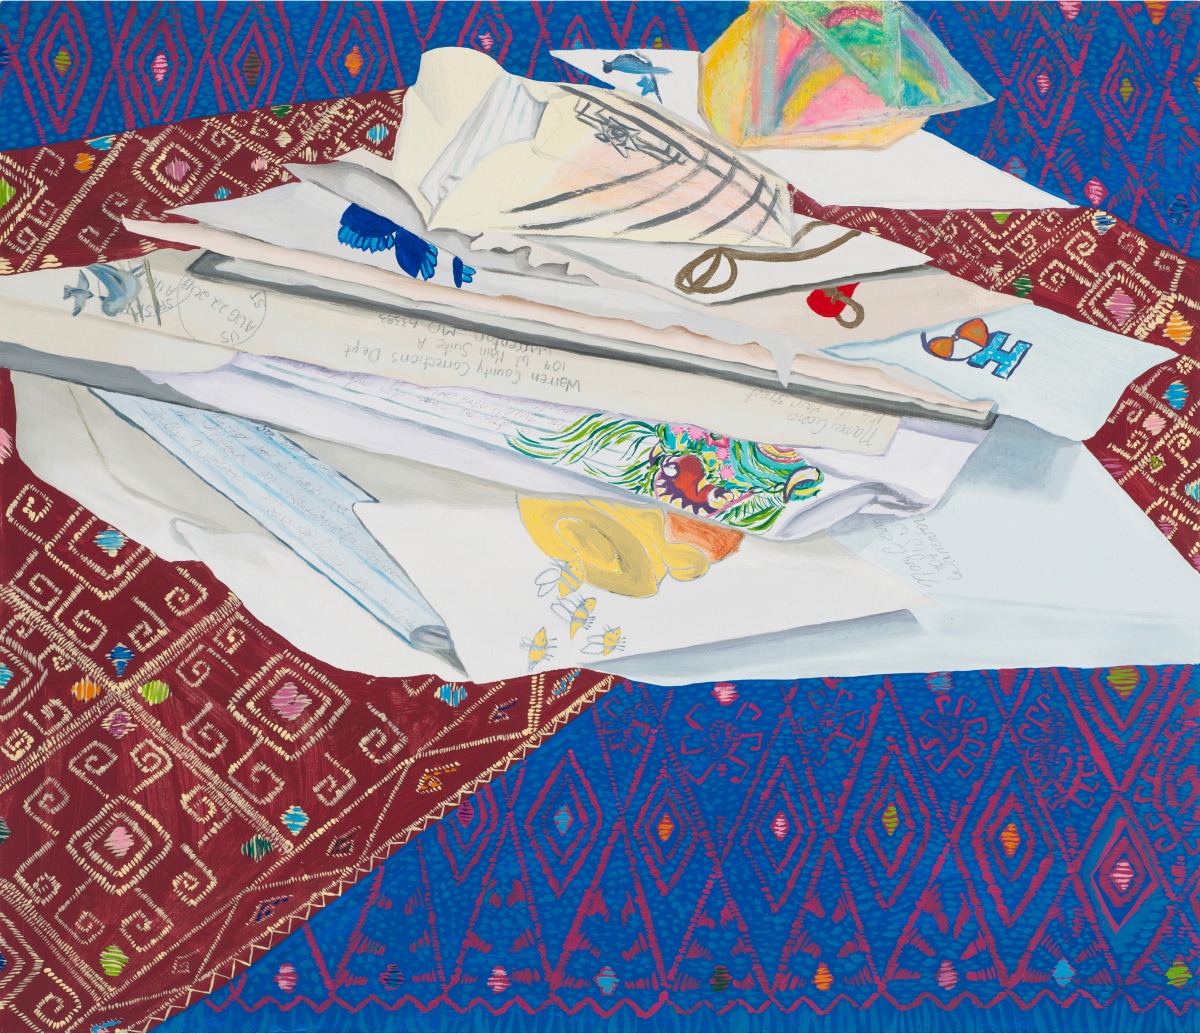 Nisenbaum’s “Nancy’s Dragon” featuring a pile of papers, including drawings and letters, on a red and blue background